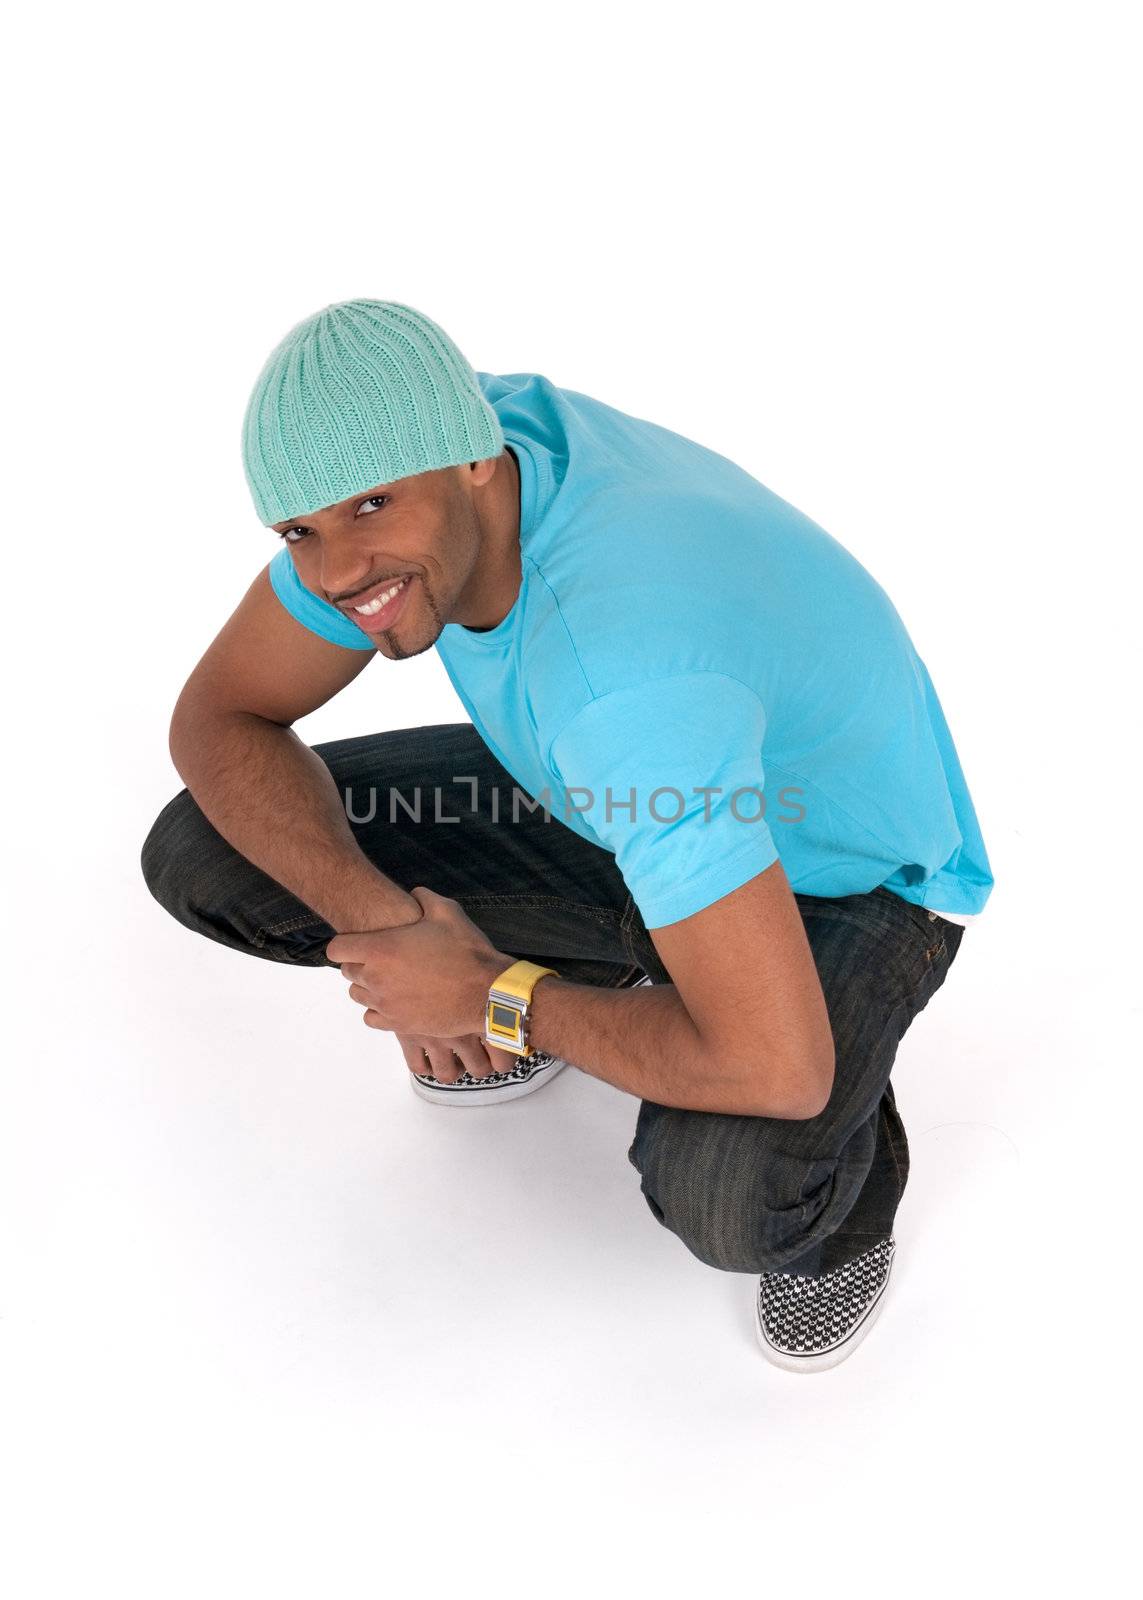 Smiling young man in a blue t-shirt squatting by anikasalsera